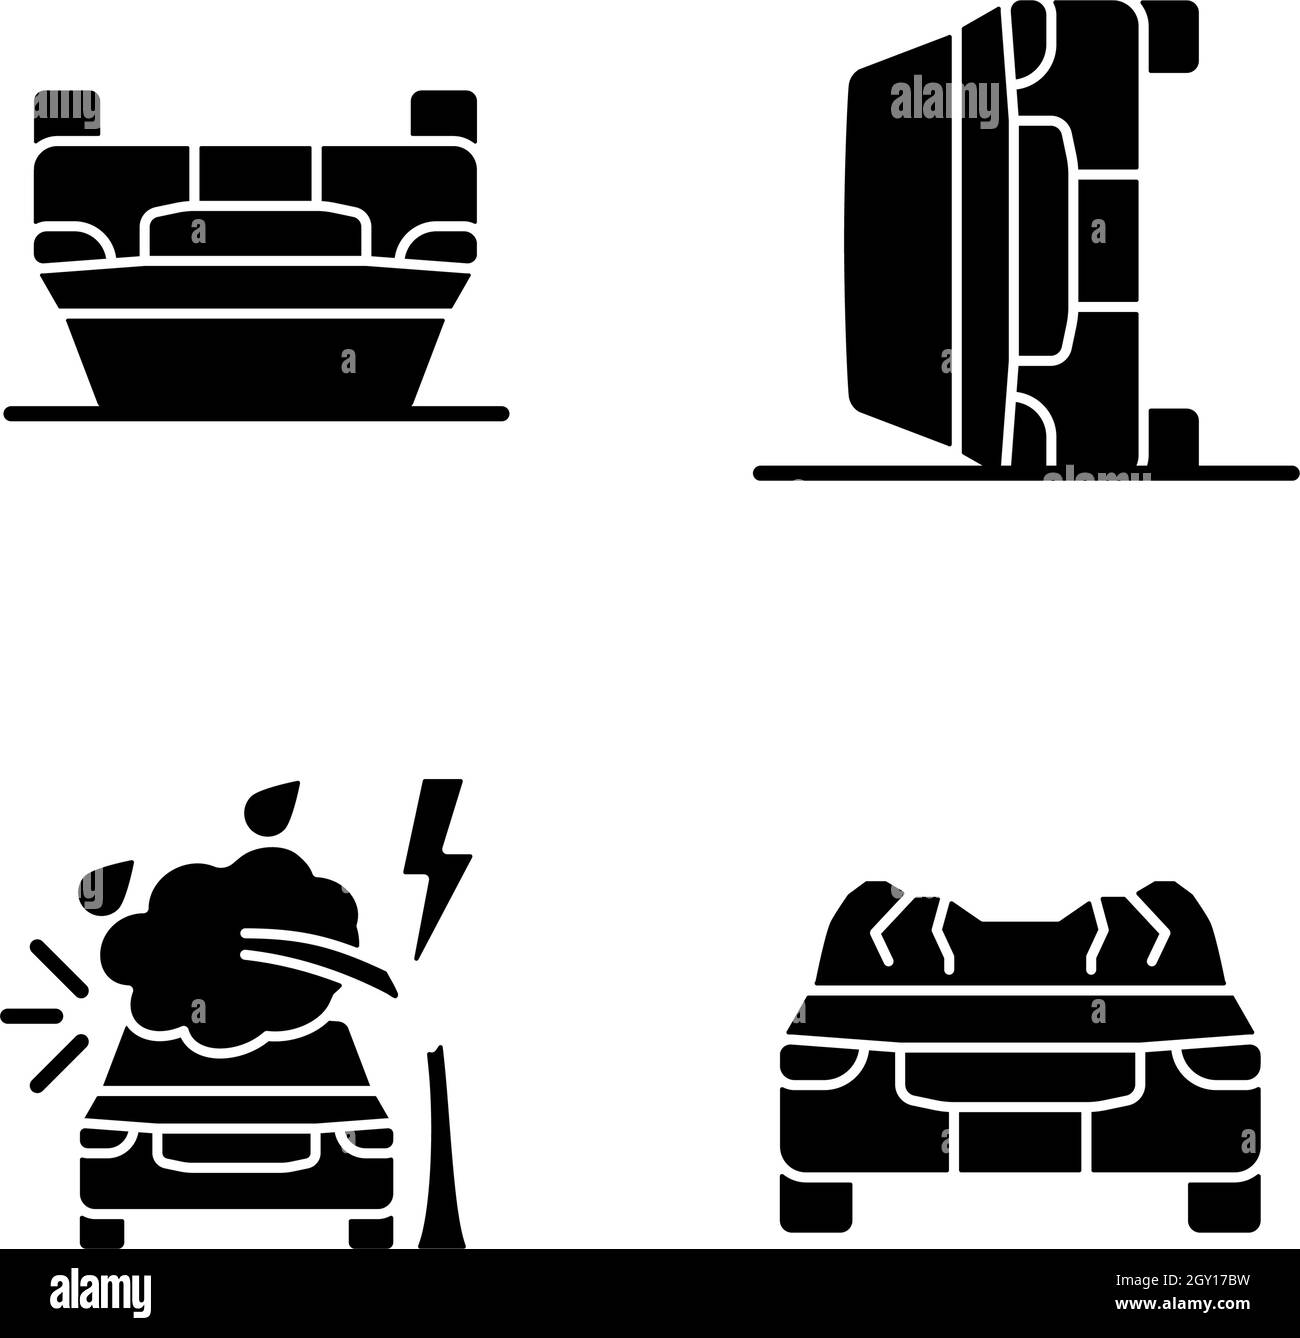 Motor vehicle collisions black glyph icons set on white space Stock Vector